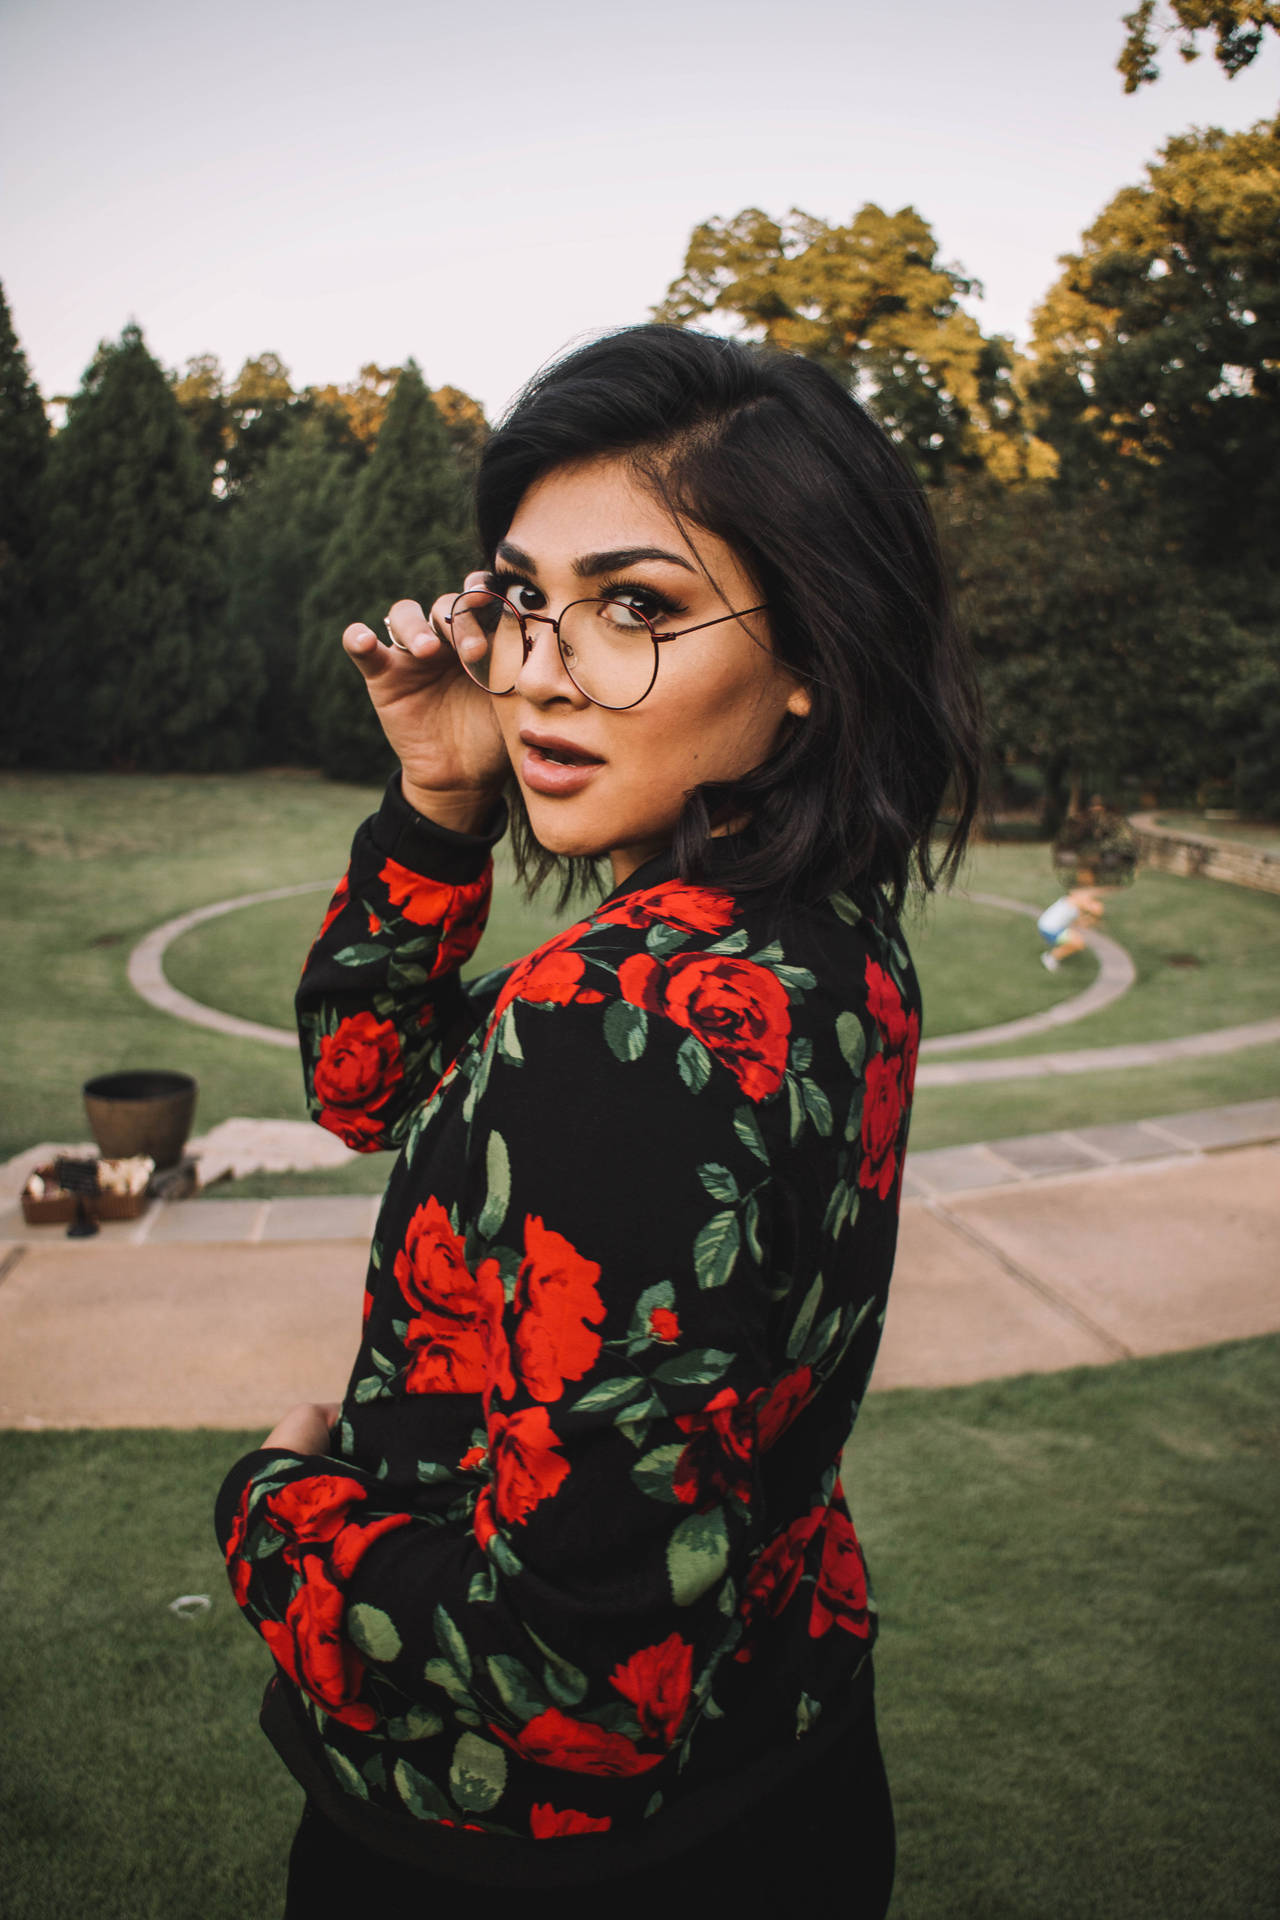 Hipster Girl In Red Roses Dress Background